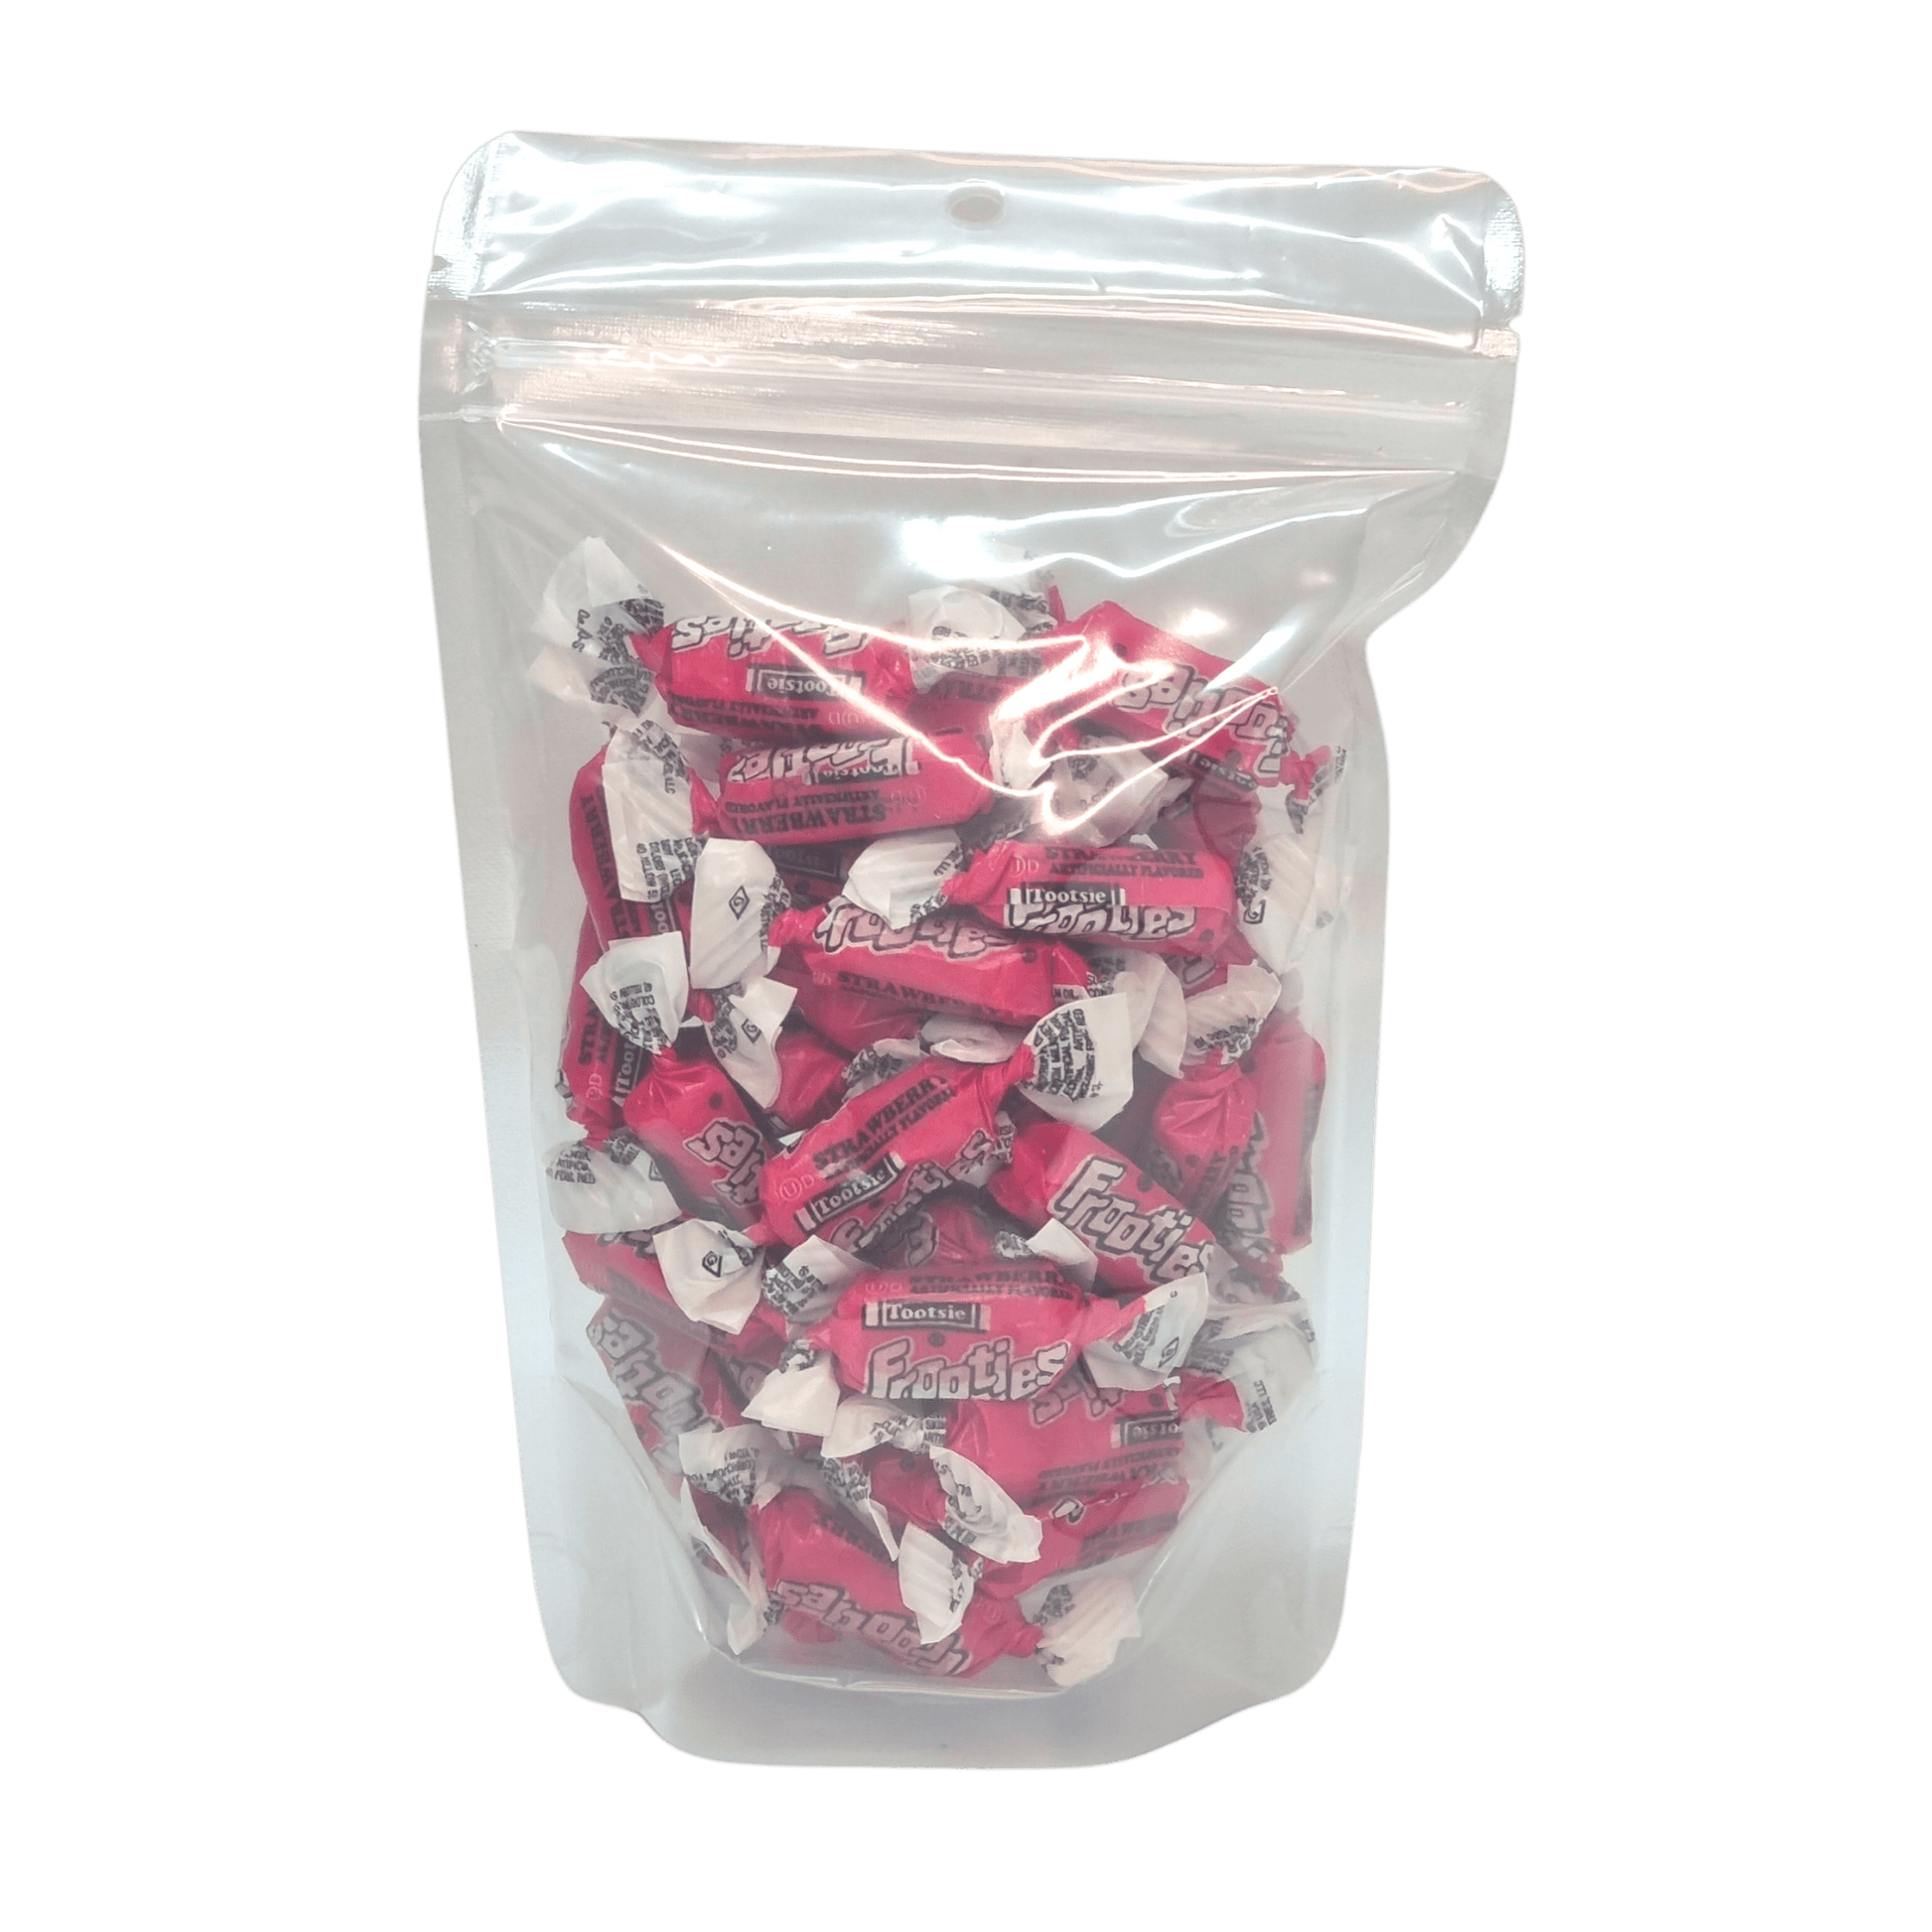 Tootsie Roll Frooties Strawberry (160g) - Candy & Chocolate - Scran.ie